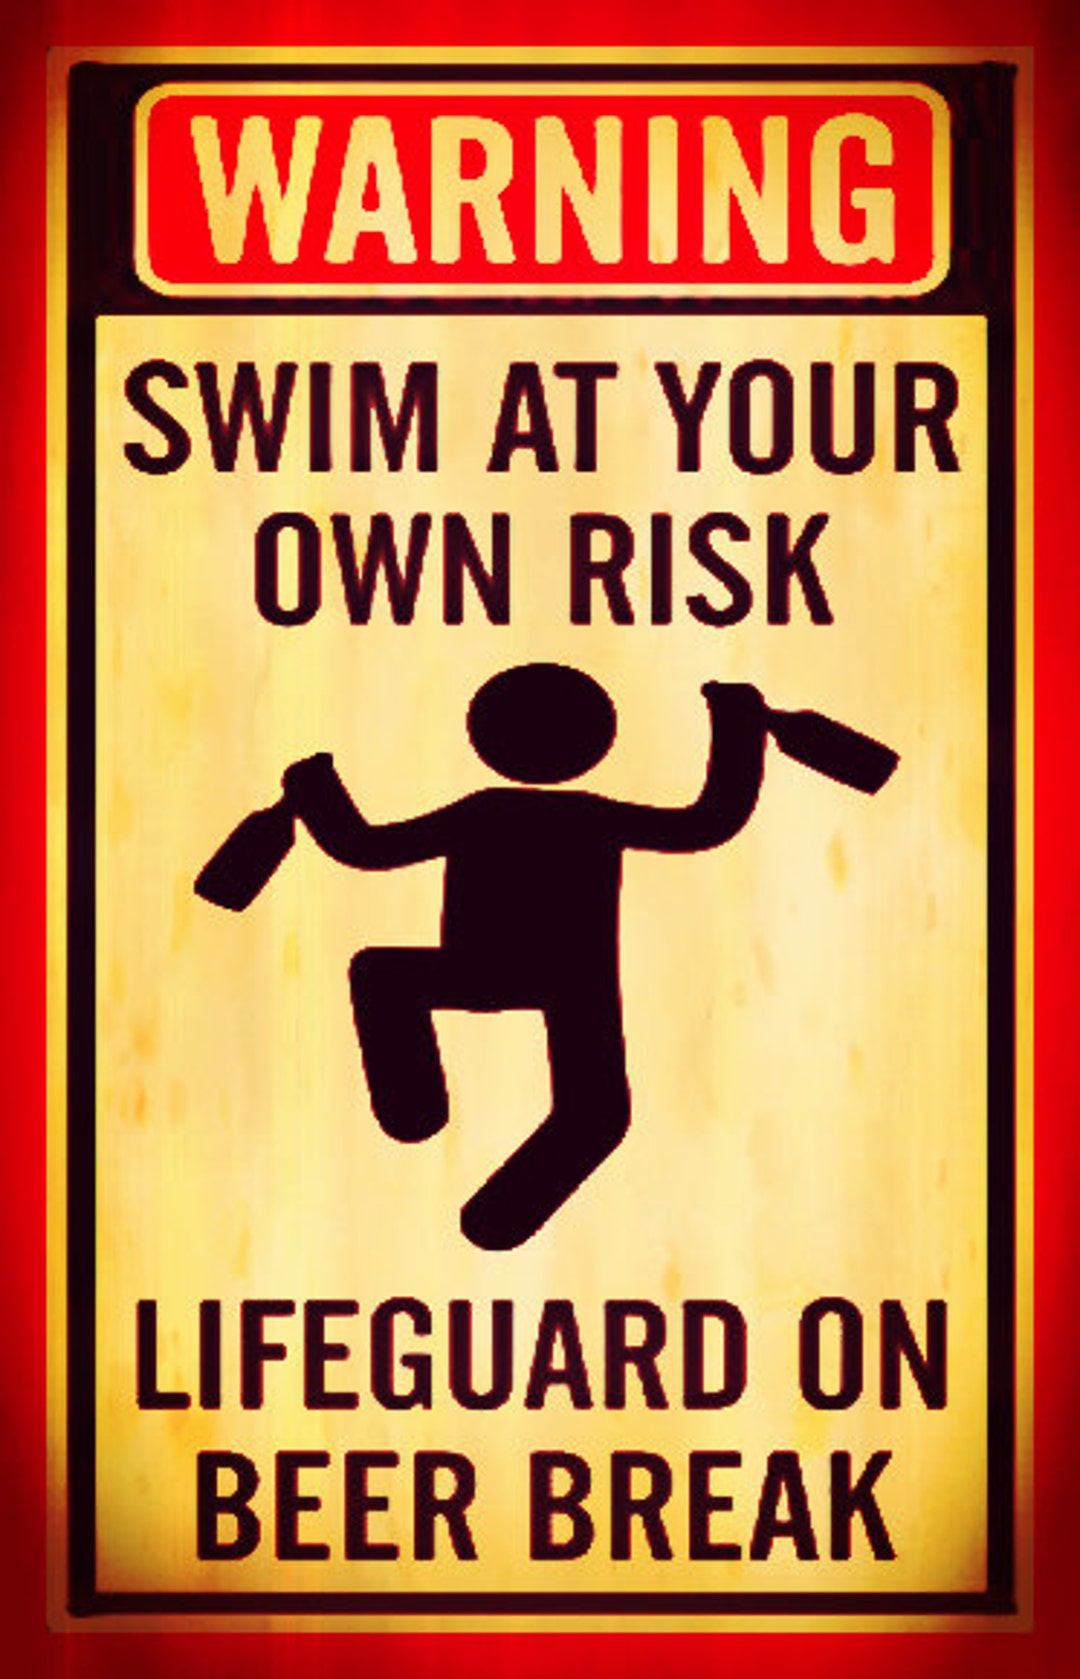 Swim at Own Risk Lifeguard on Beer Break Made in USA 8x12 Metal